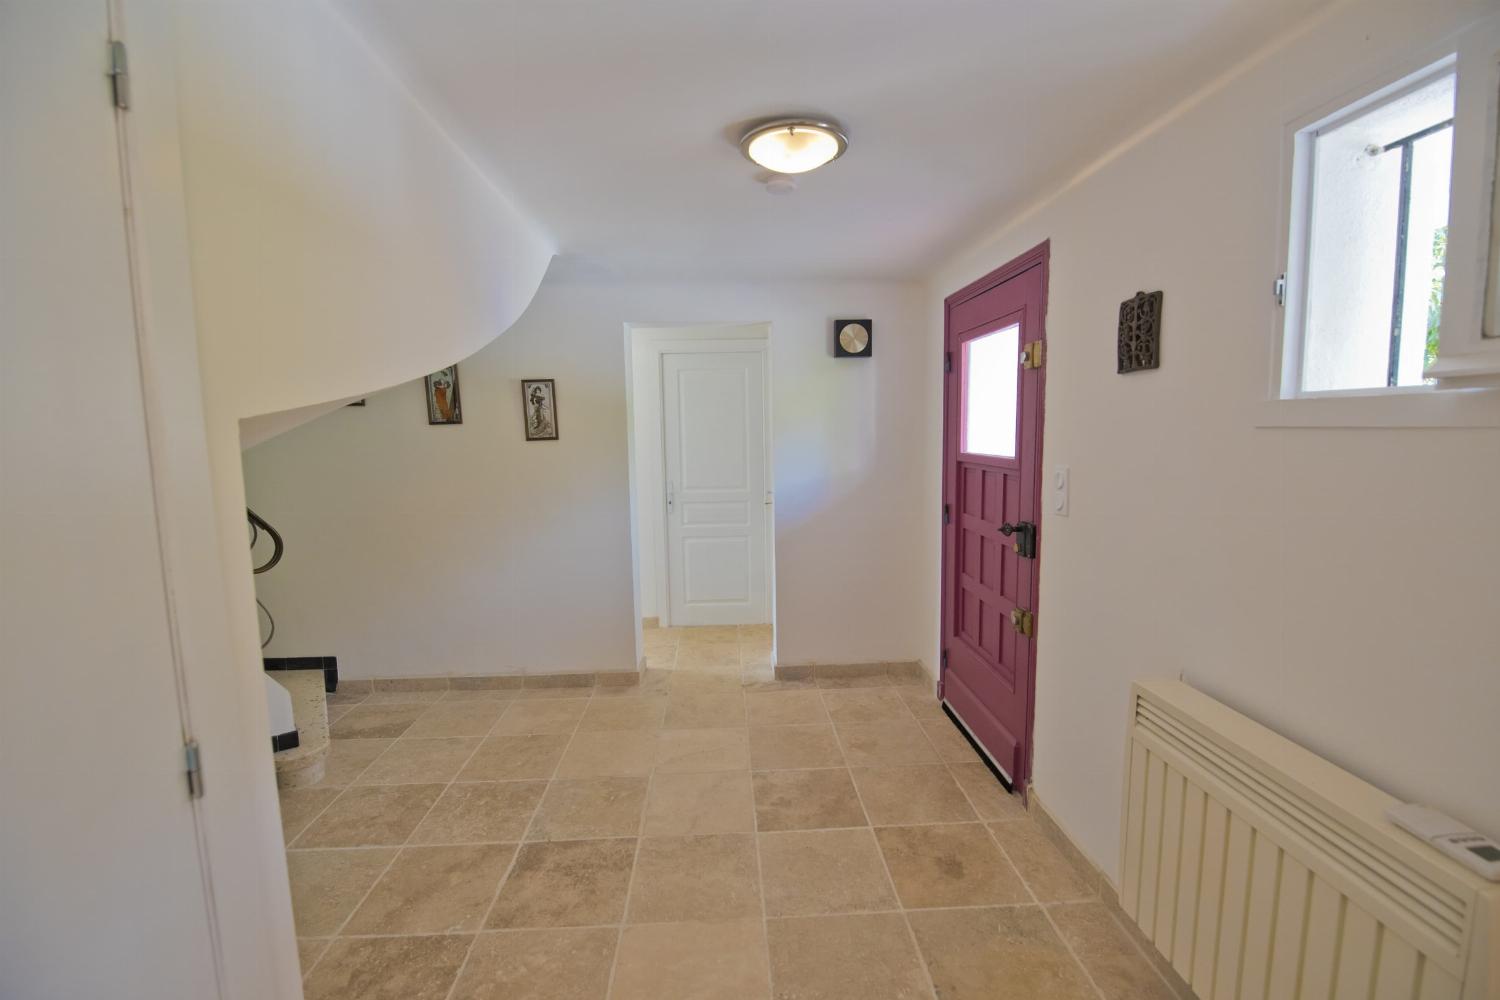 Hallway | Rental home in South of France